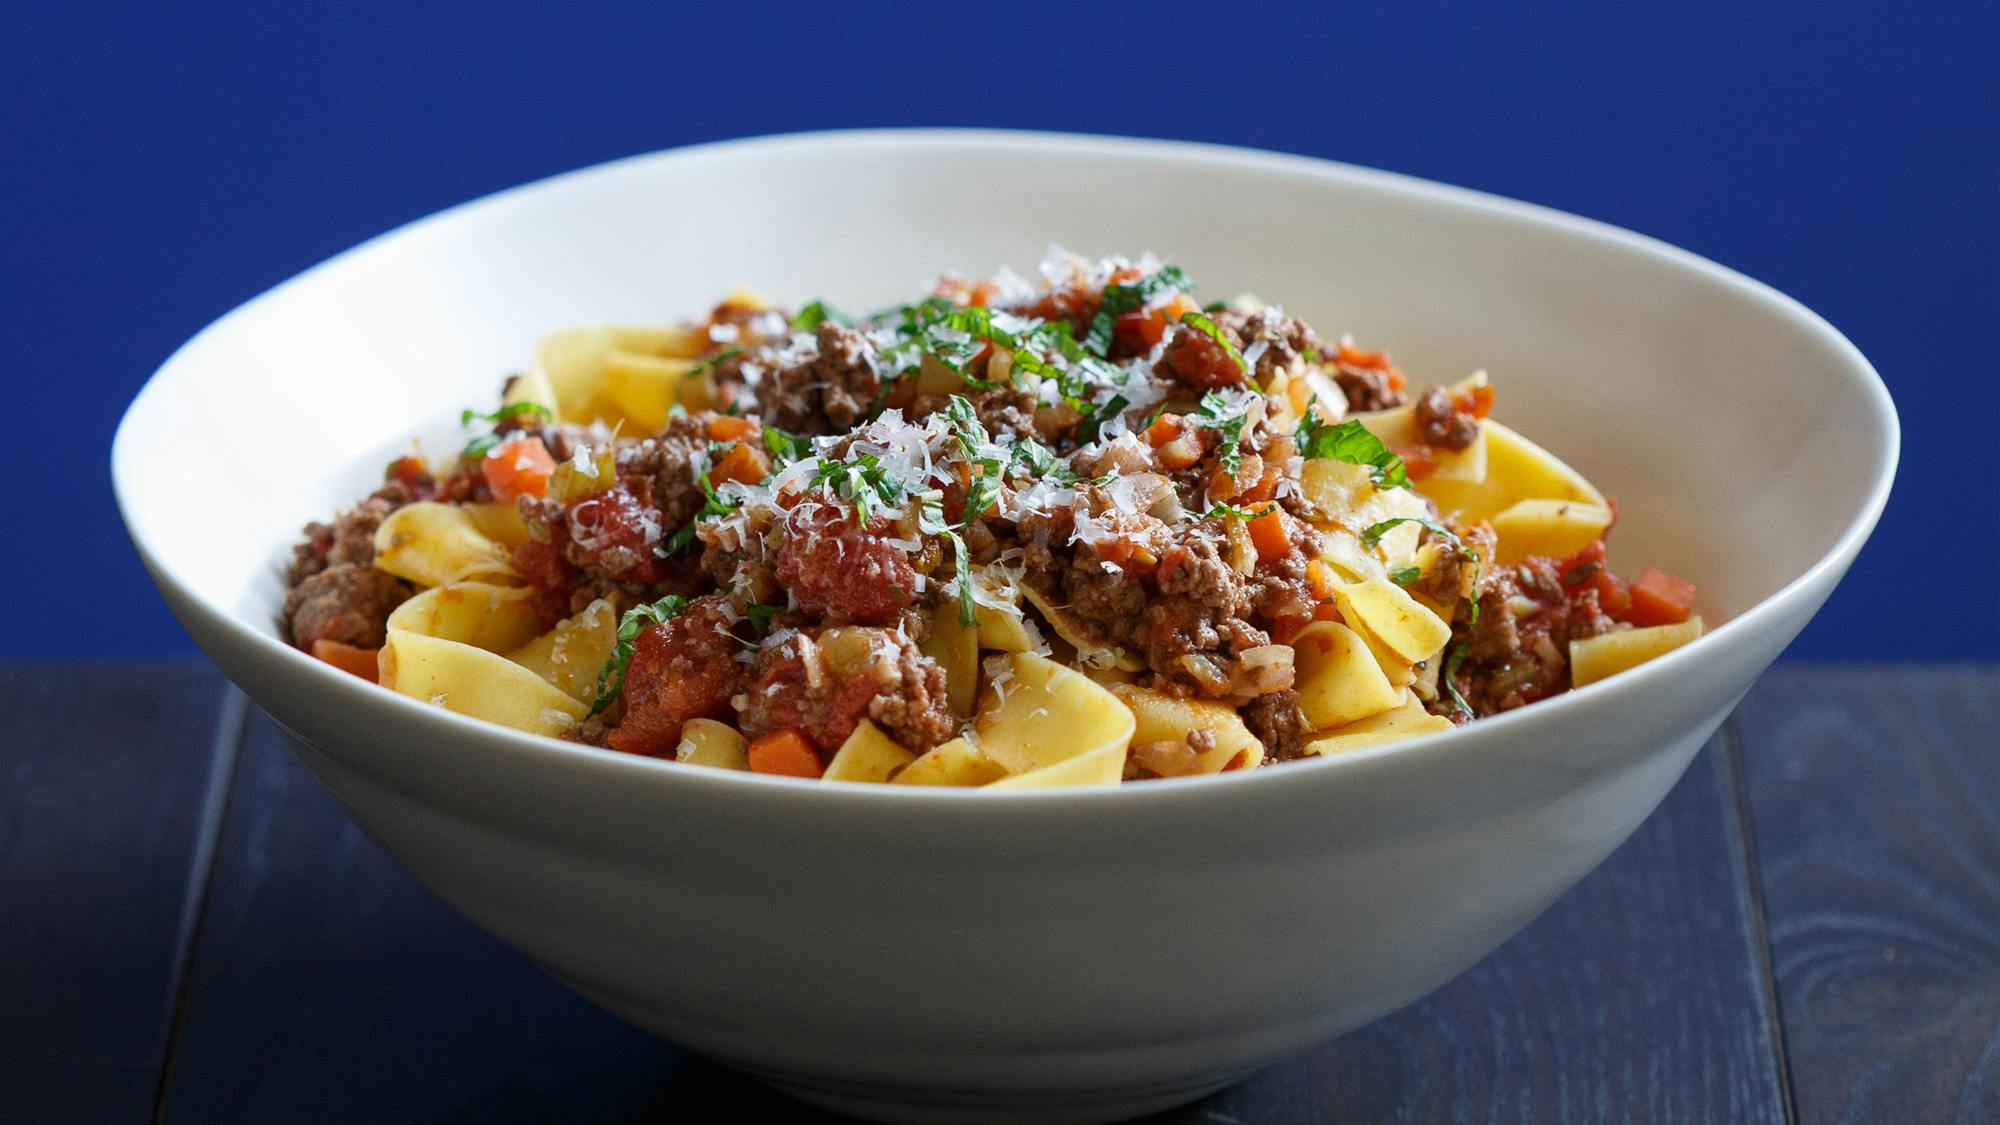 Best Lamb Ragu with Pappardelle Recipe